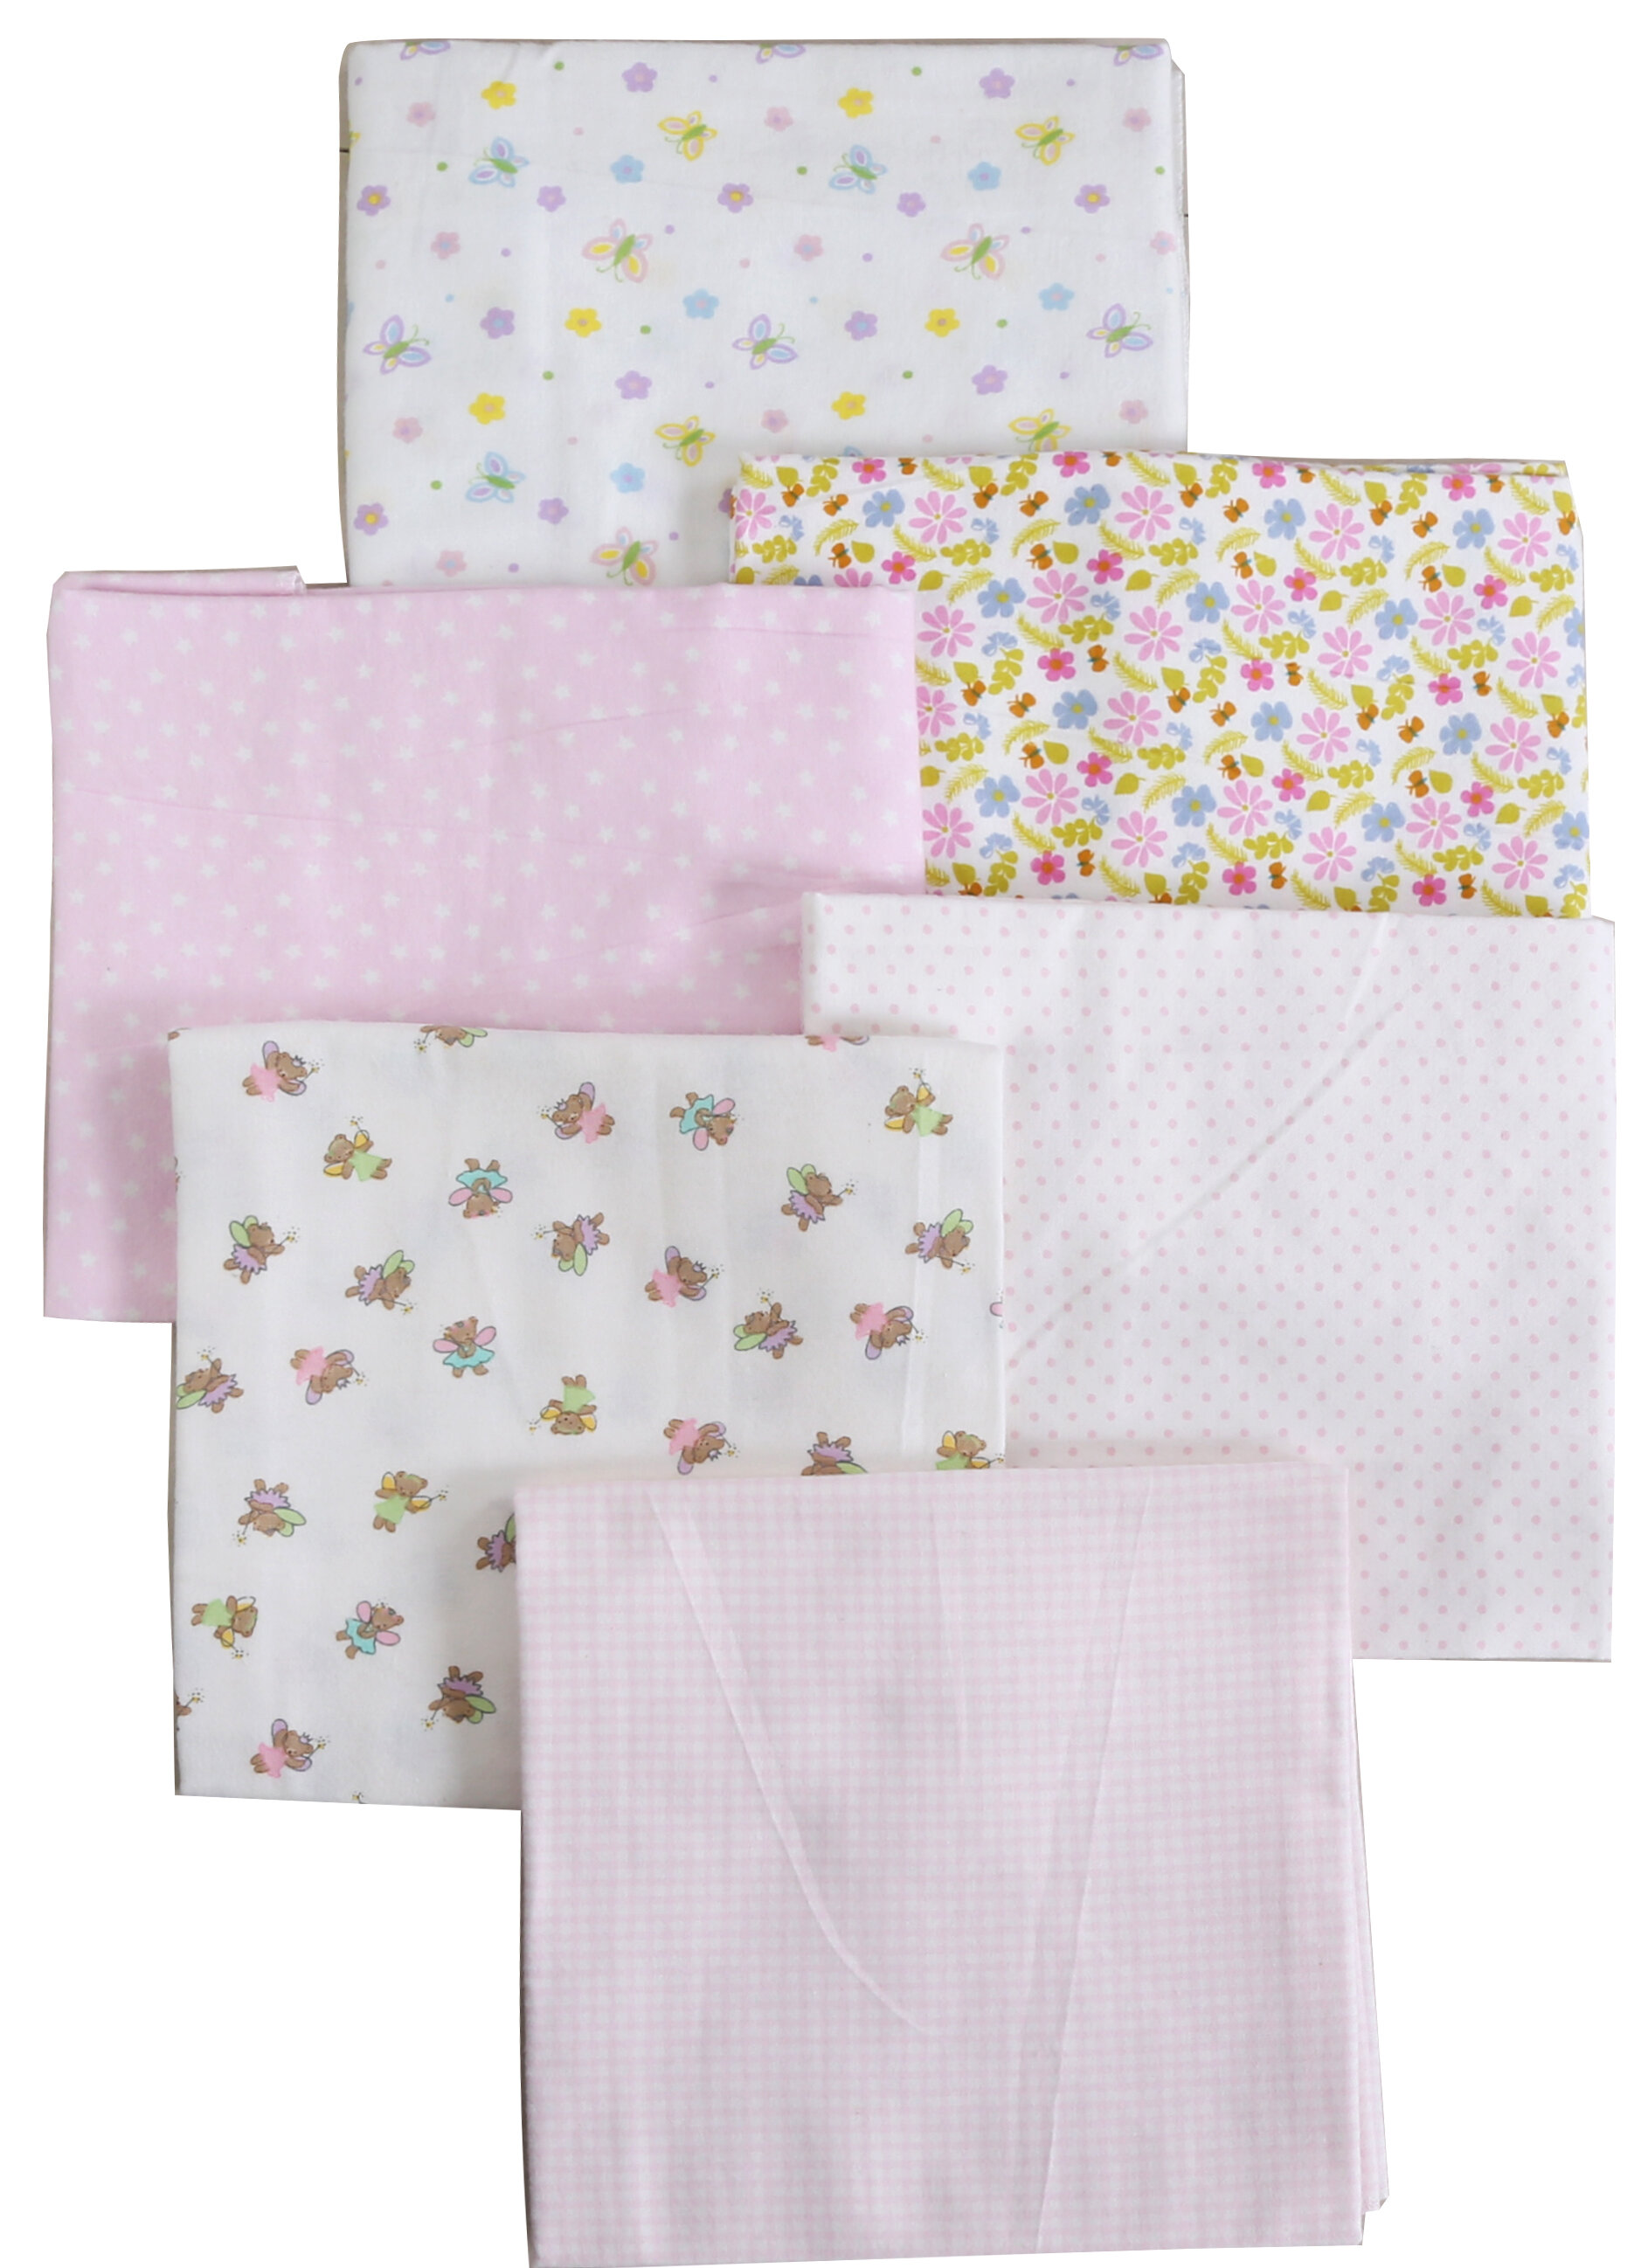 4 Pcs Pack Infant/Baby Pure Cotton Flannel Receiver/Wrap/Blanket by Mothers Choice Green